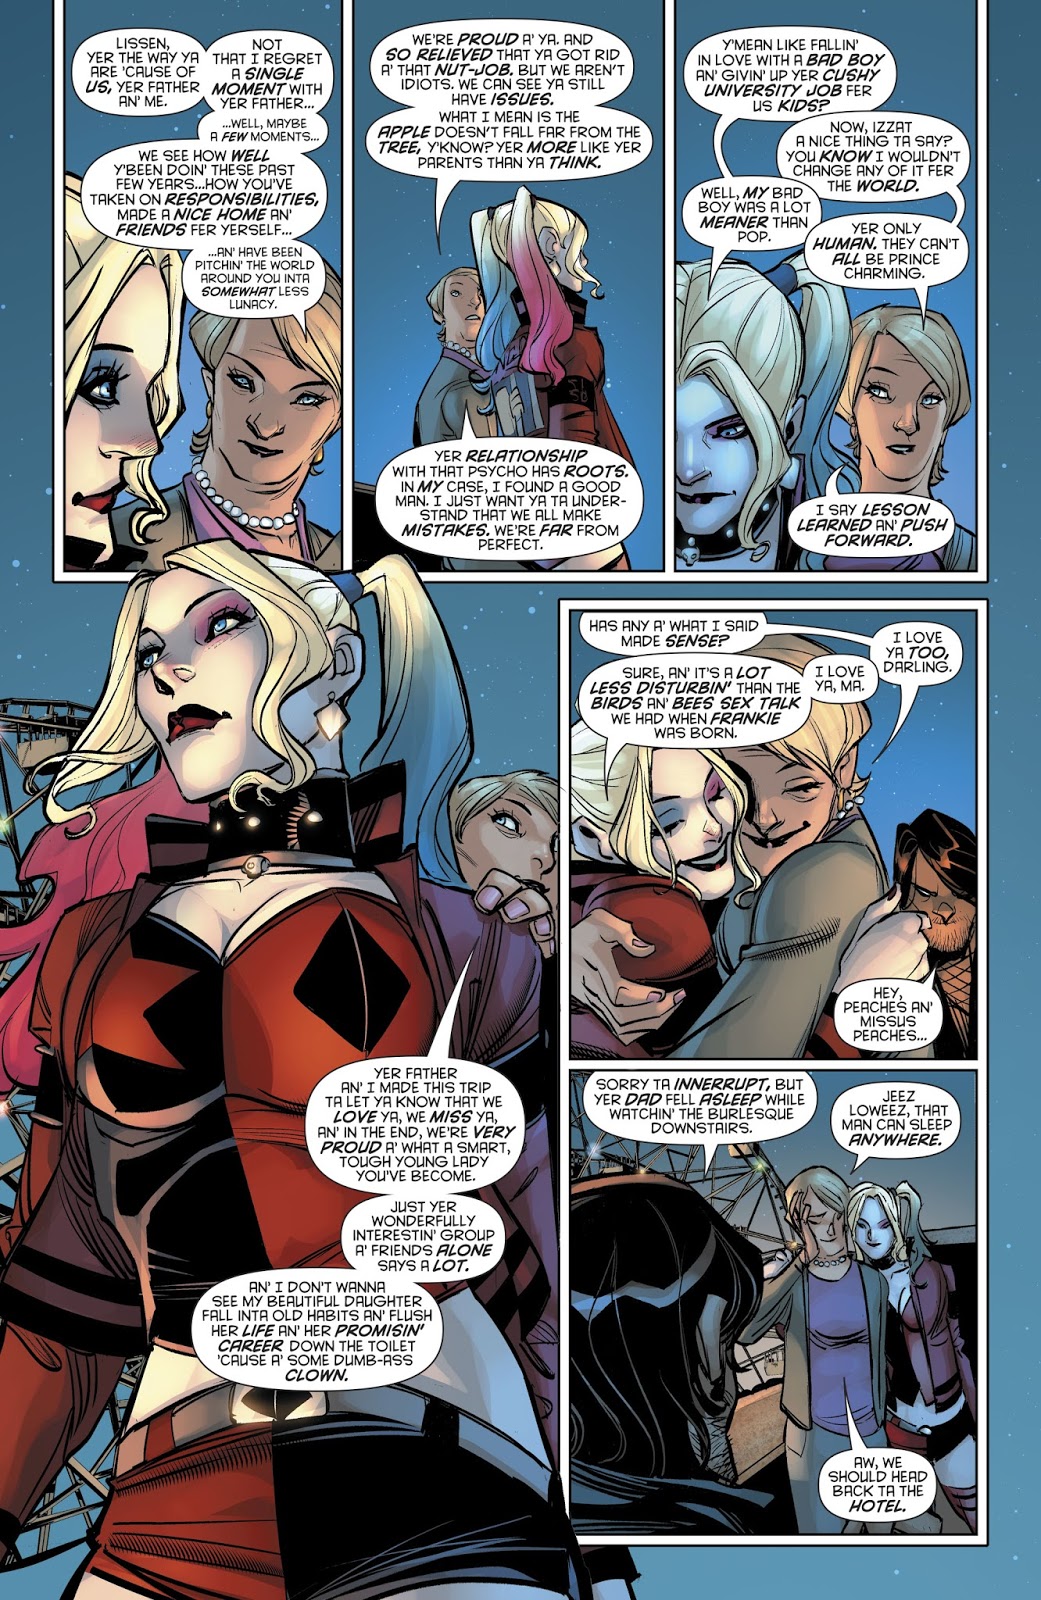 Relationship Advice From Harley Quinn's Mother 